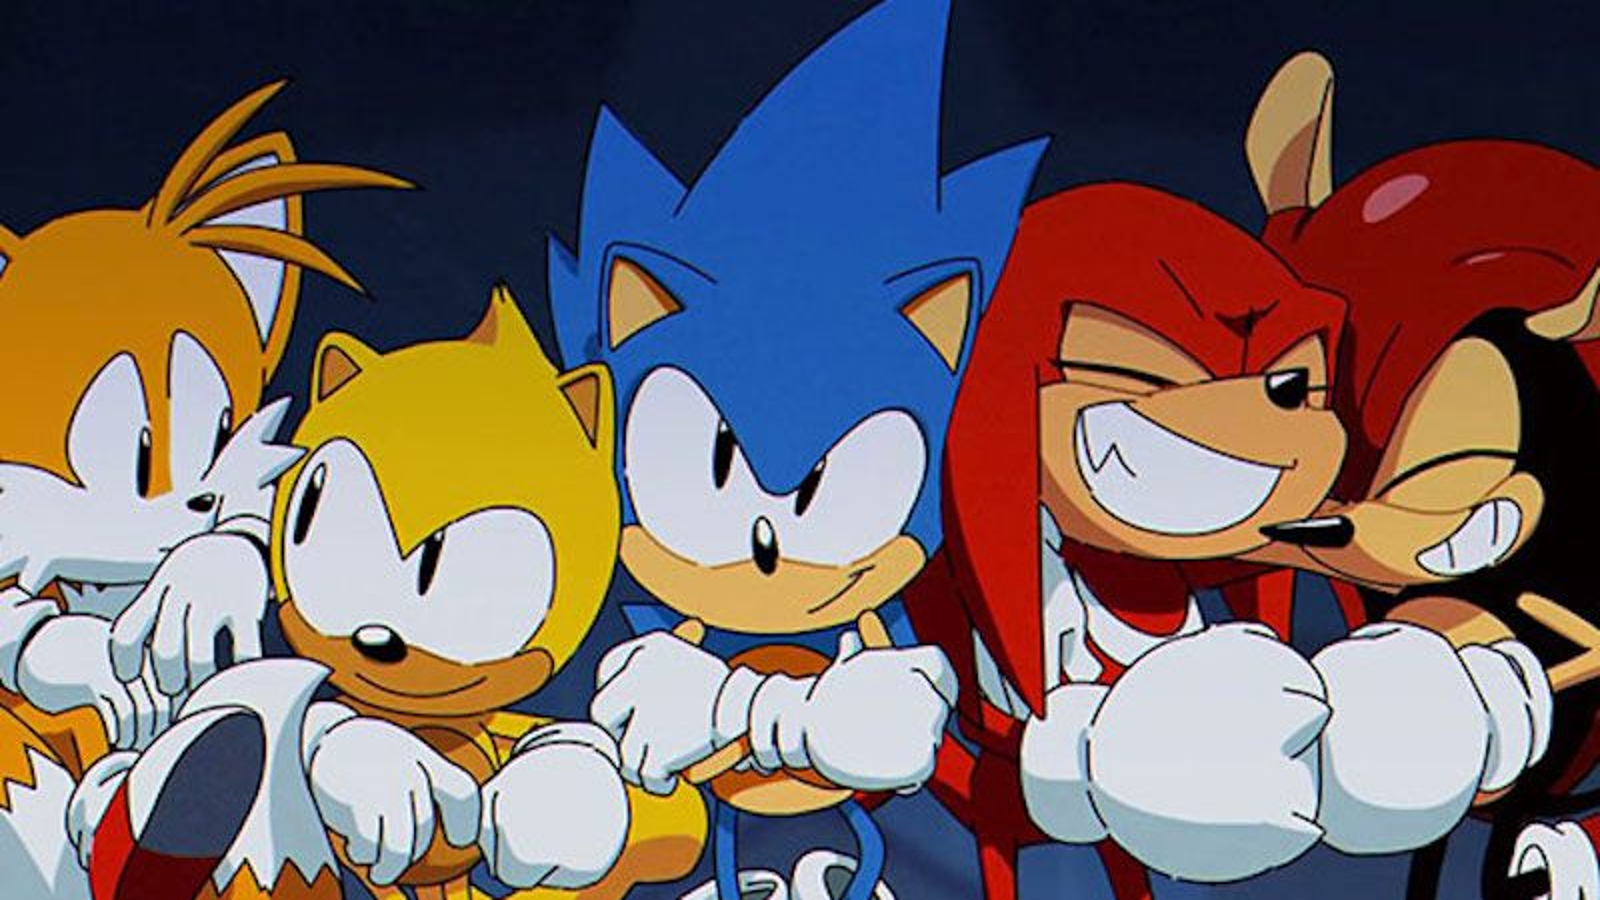 Your Move: Sonic Mania